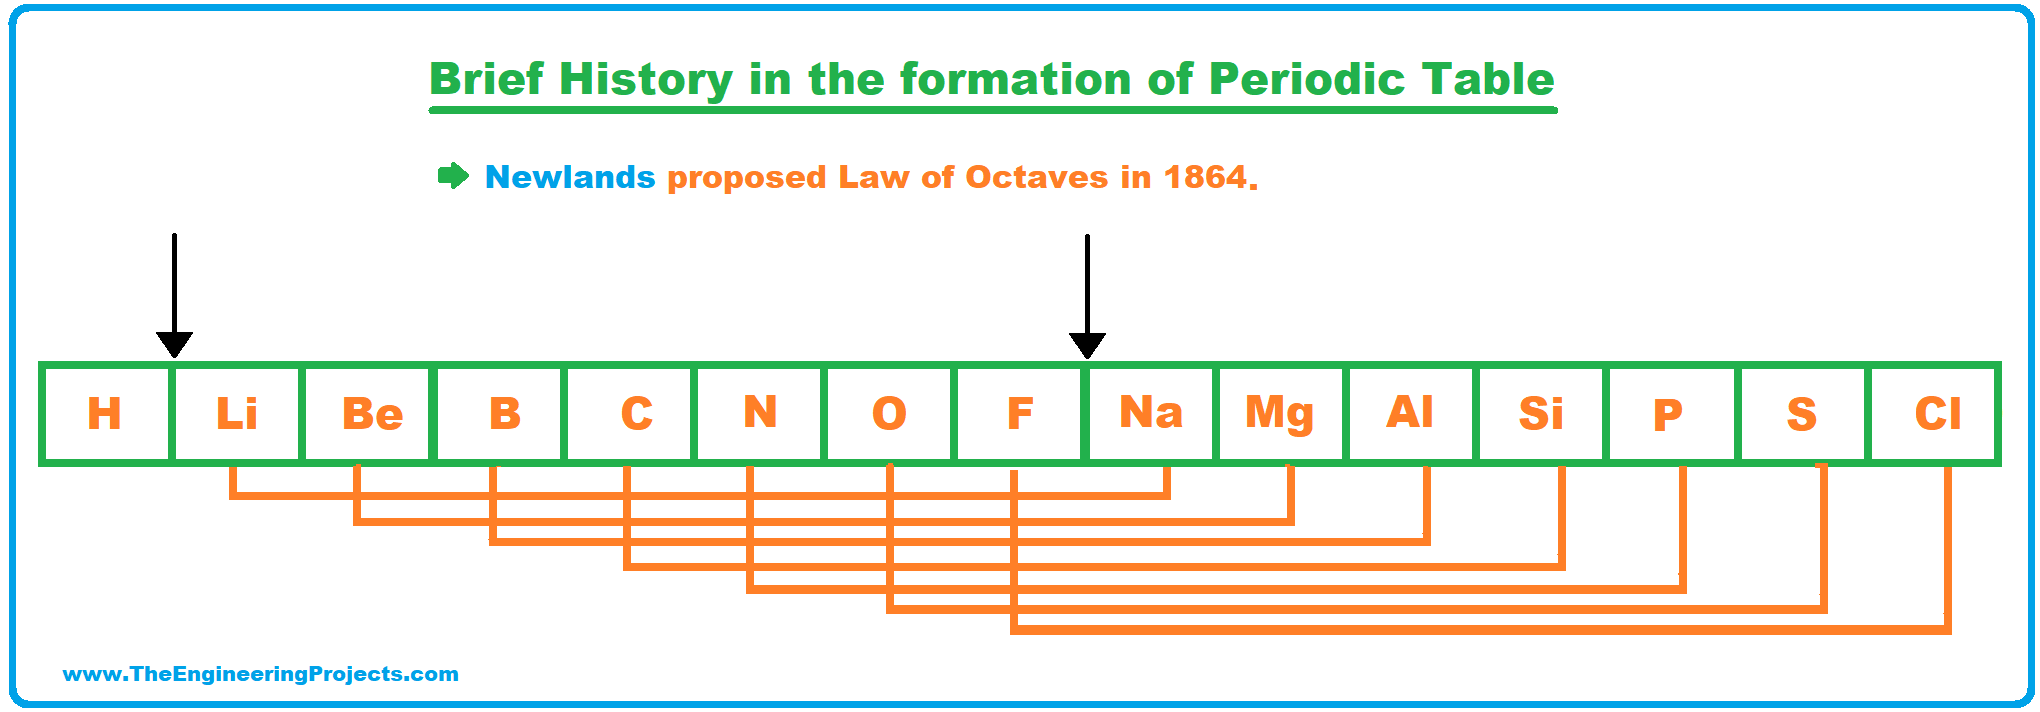 History of Periodic Table, Periodic Table, law of octaves, newlands law of octaves, periodic table deifnition, periodic table history